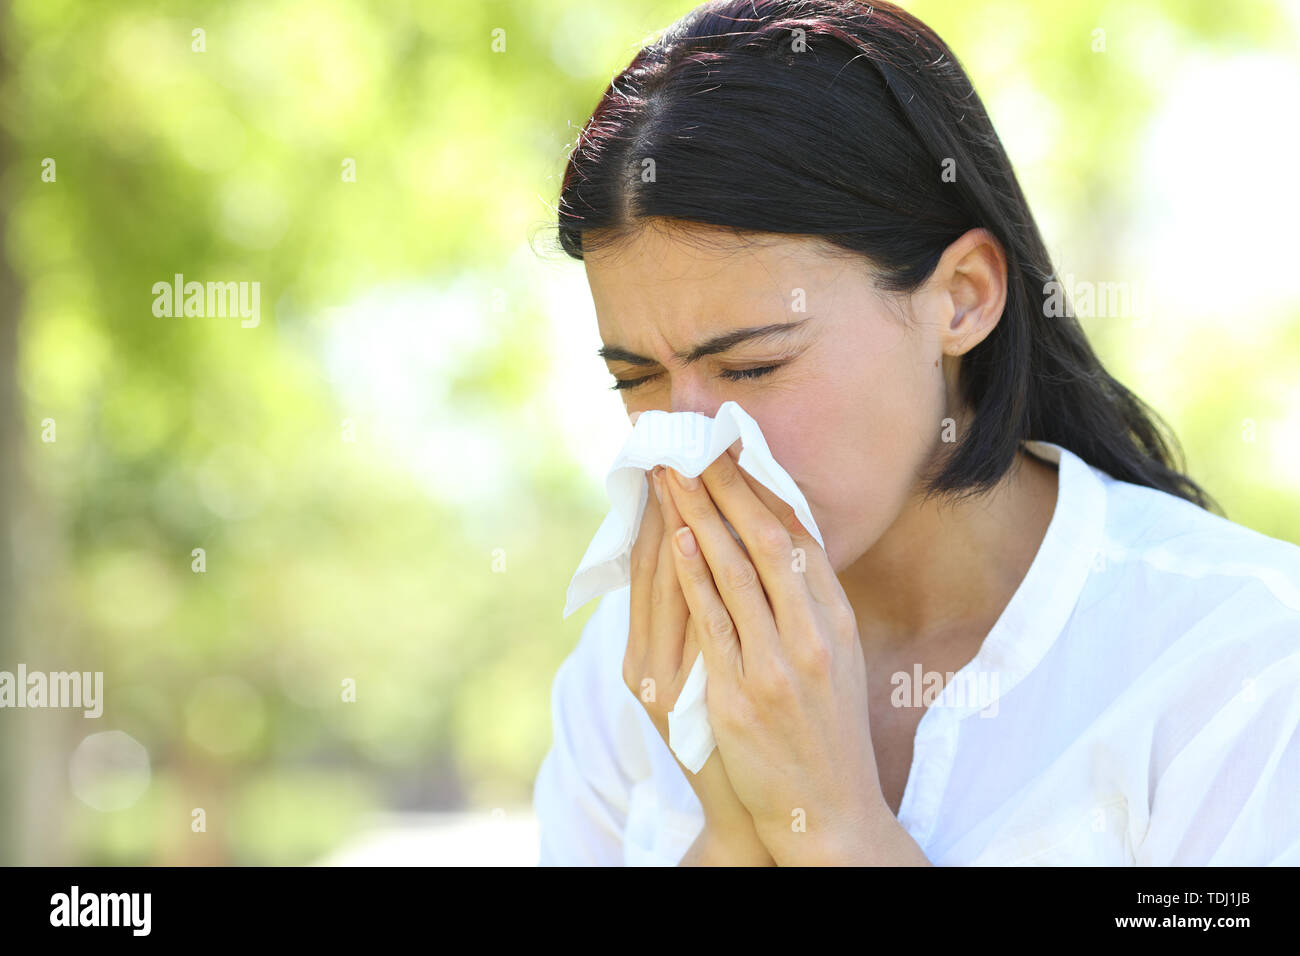 Ill woman sneezing covering mouth with a wipe standing in a park with a green background Stock Photo